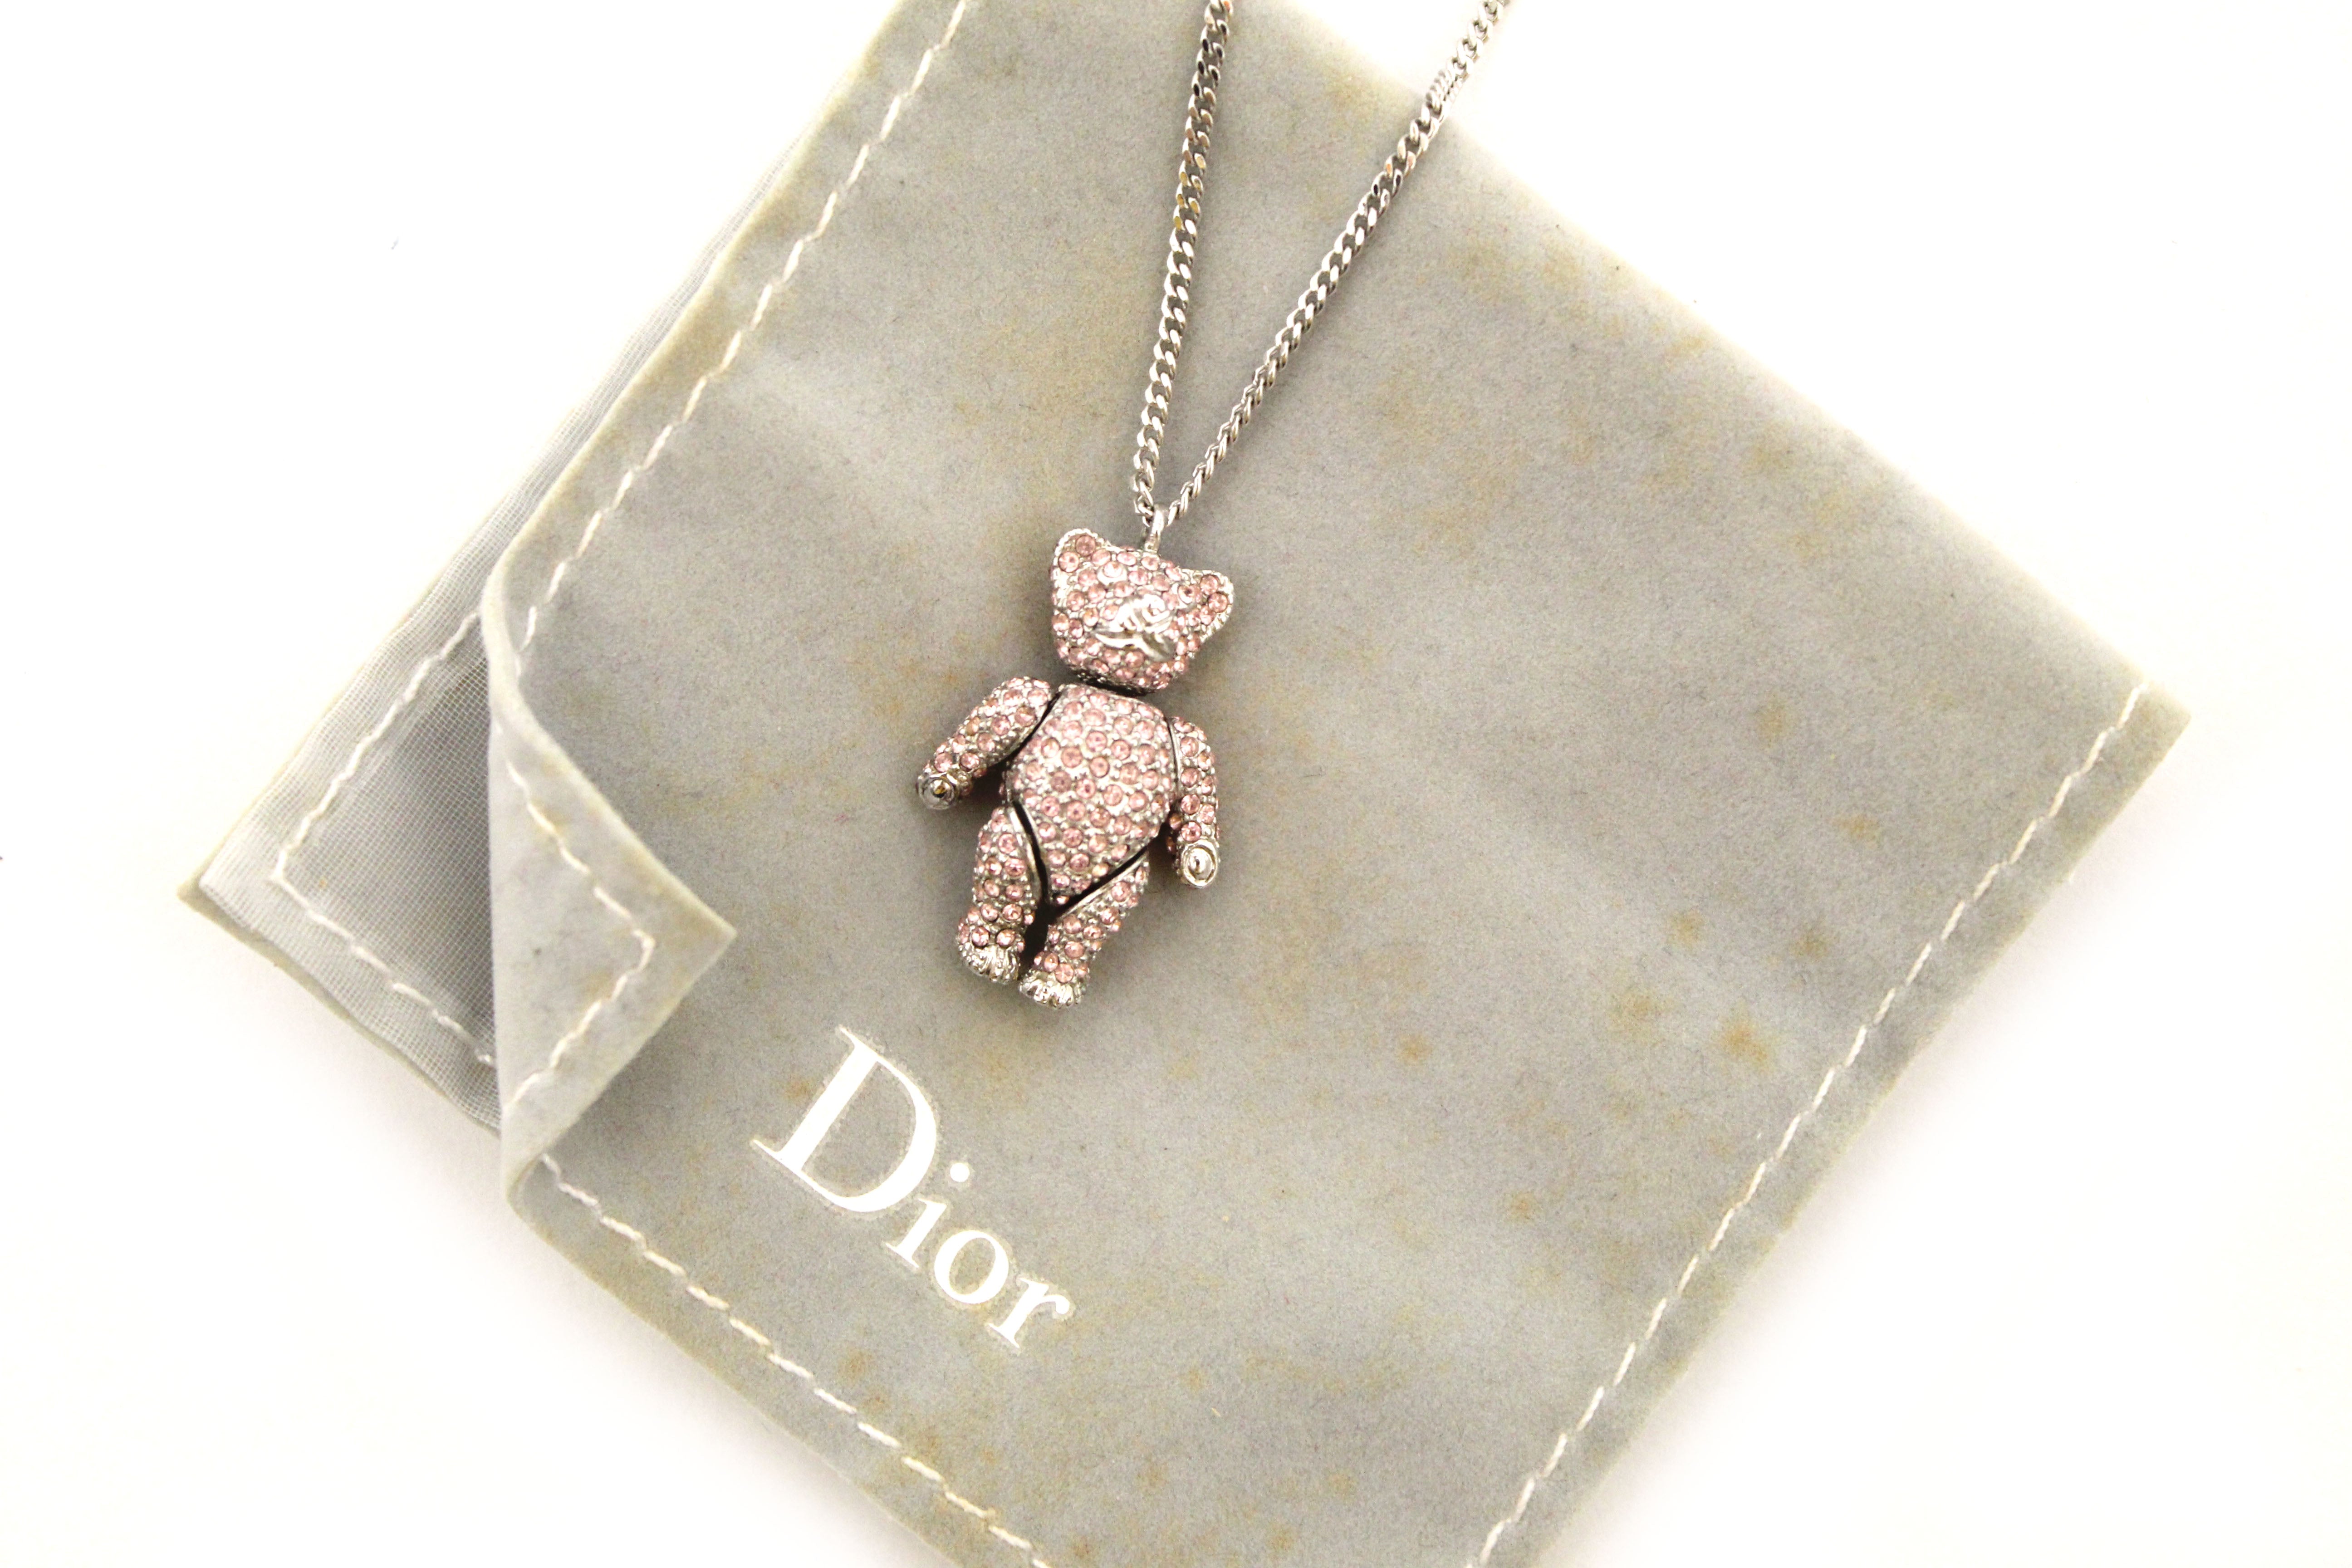 Authentic Christian Dior Vintage Pink Crystal Teddy Bear Necklace